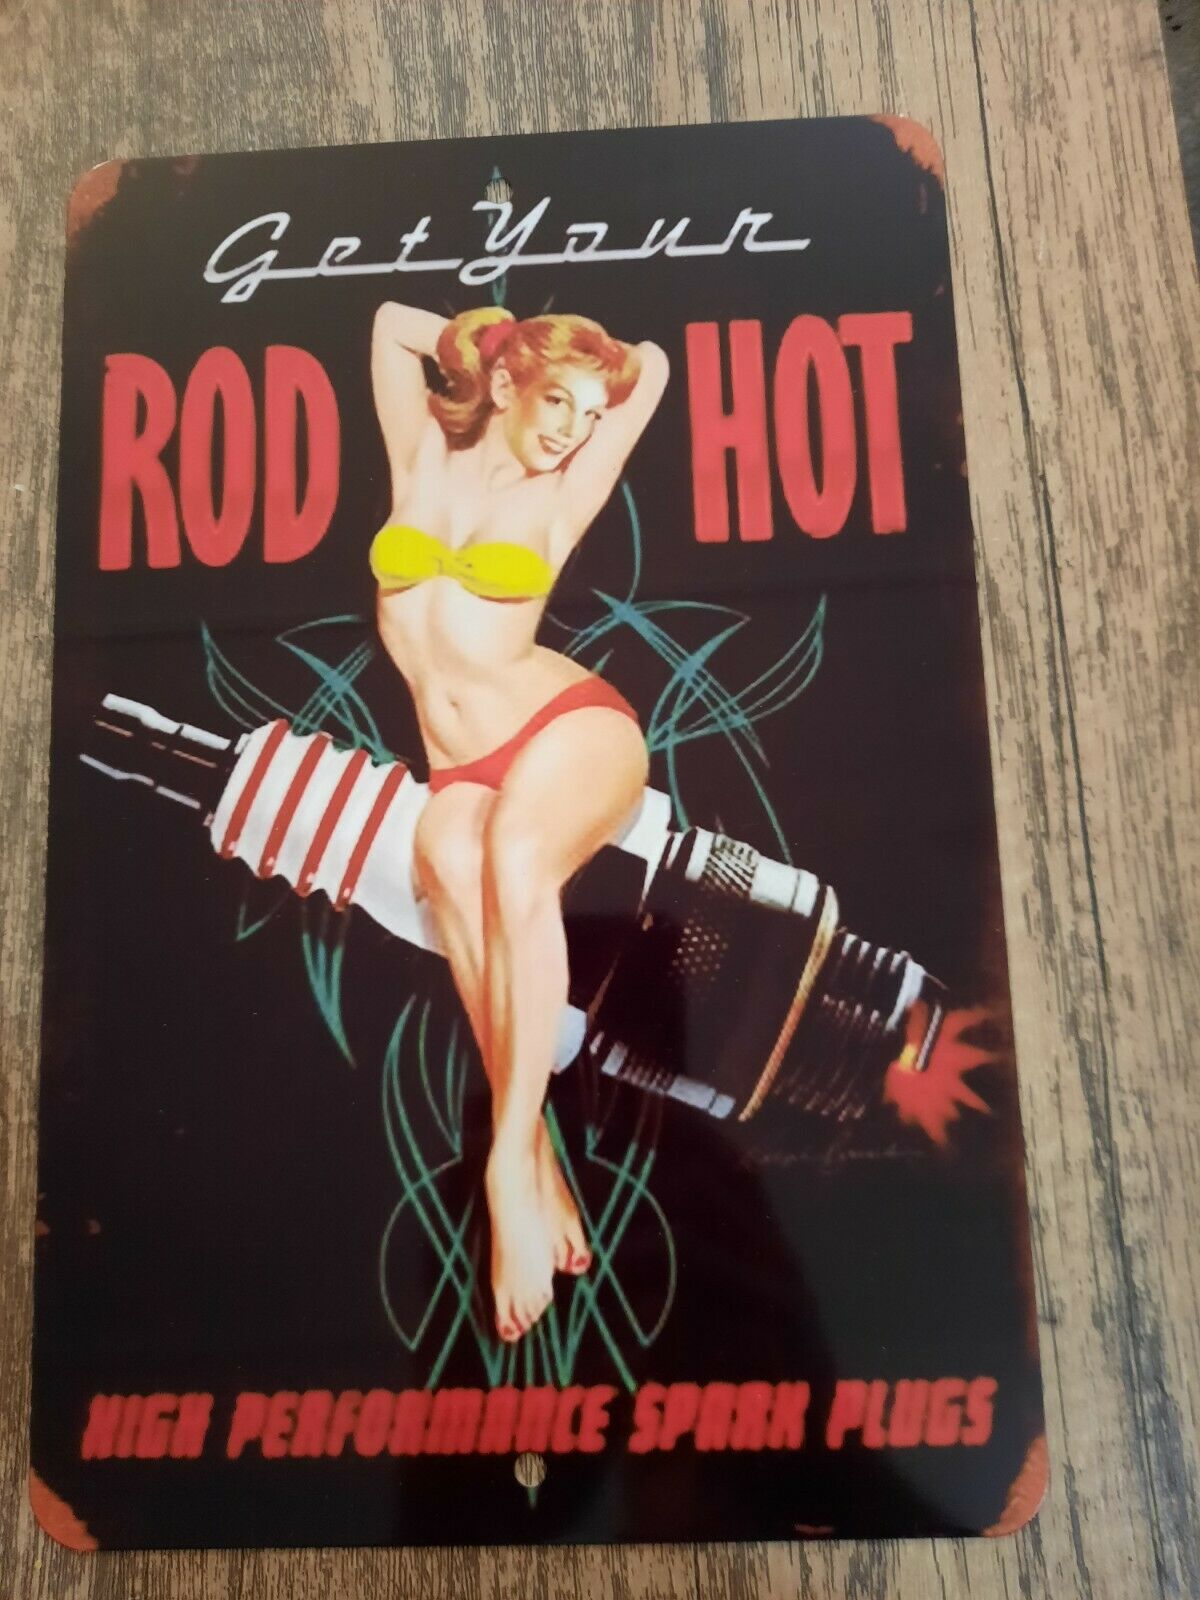 Get Your Rod Hot Spark Plugs Vintage Ad 8x12 Metal Wall Sign Garage Poster Funny